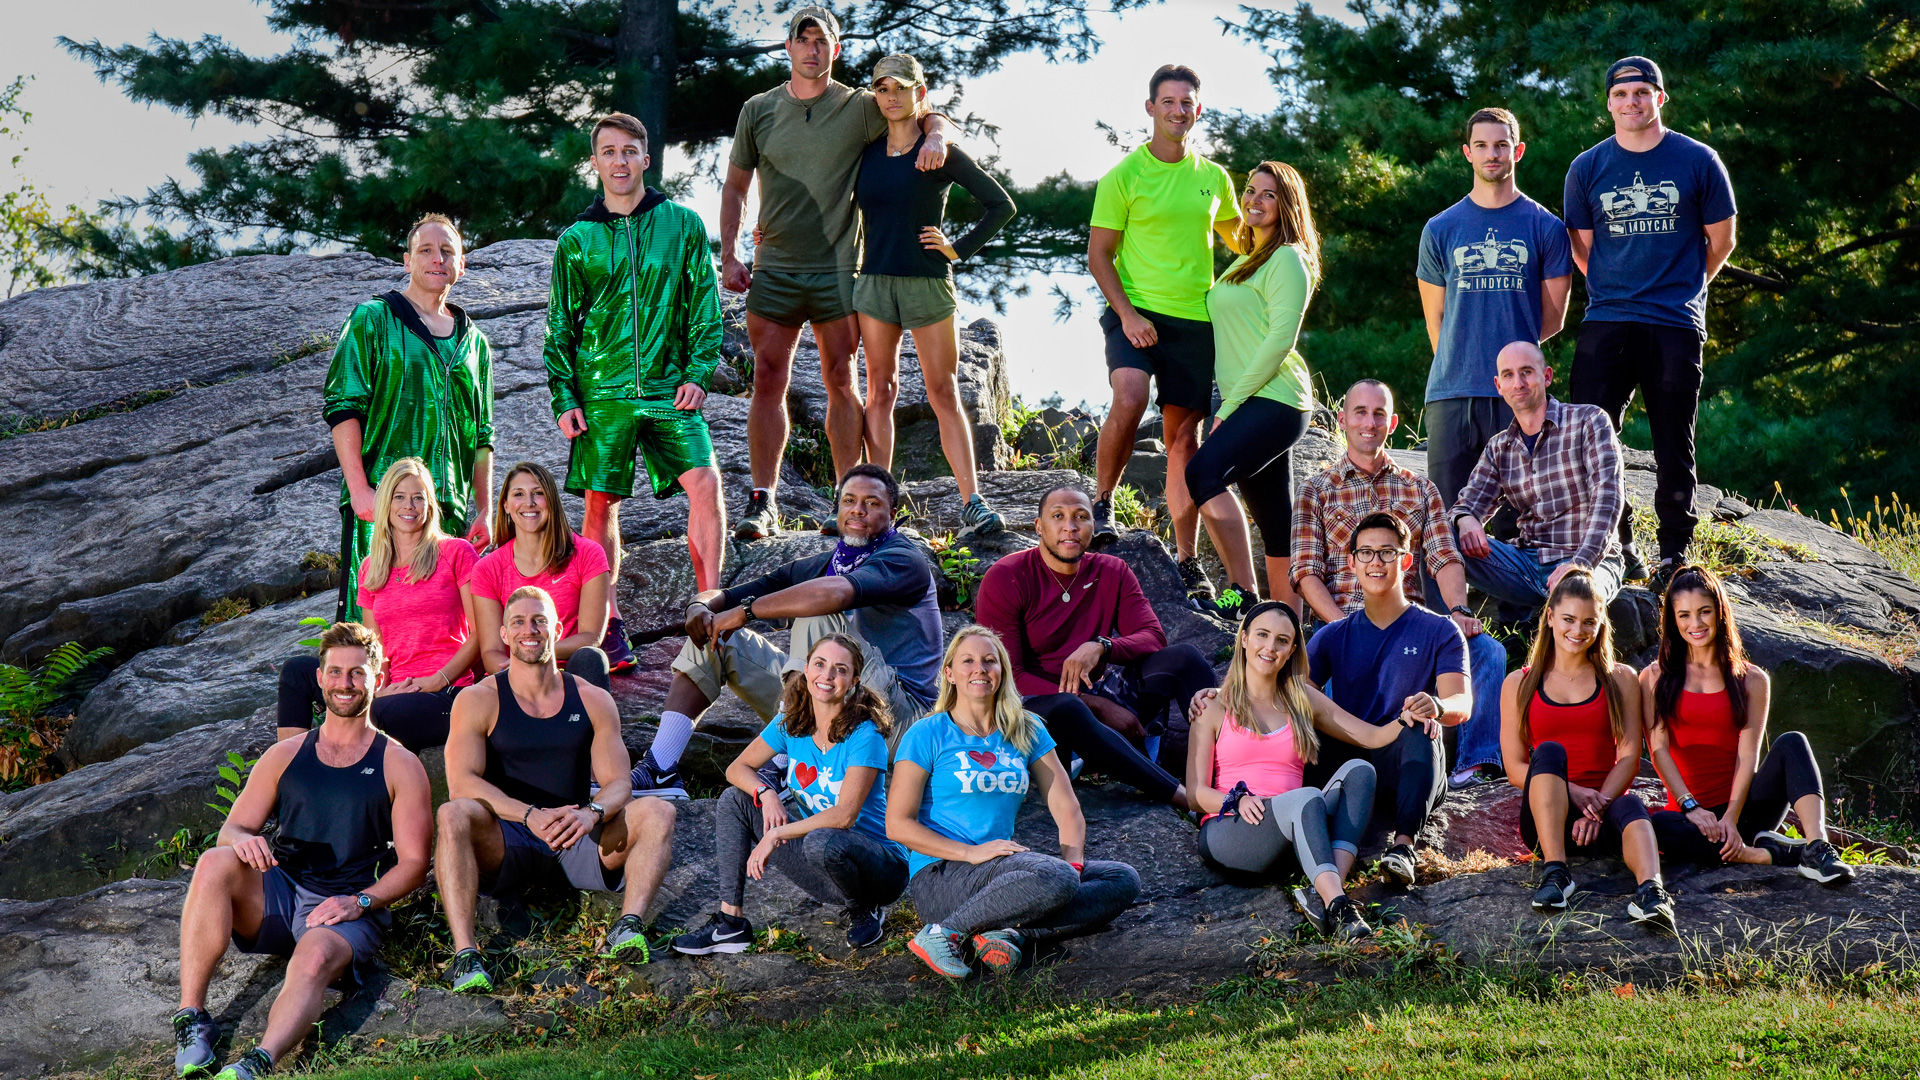 Amazing Race Season 30 The Complete Oral History!